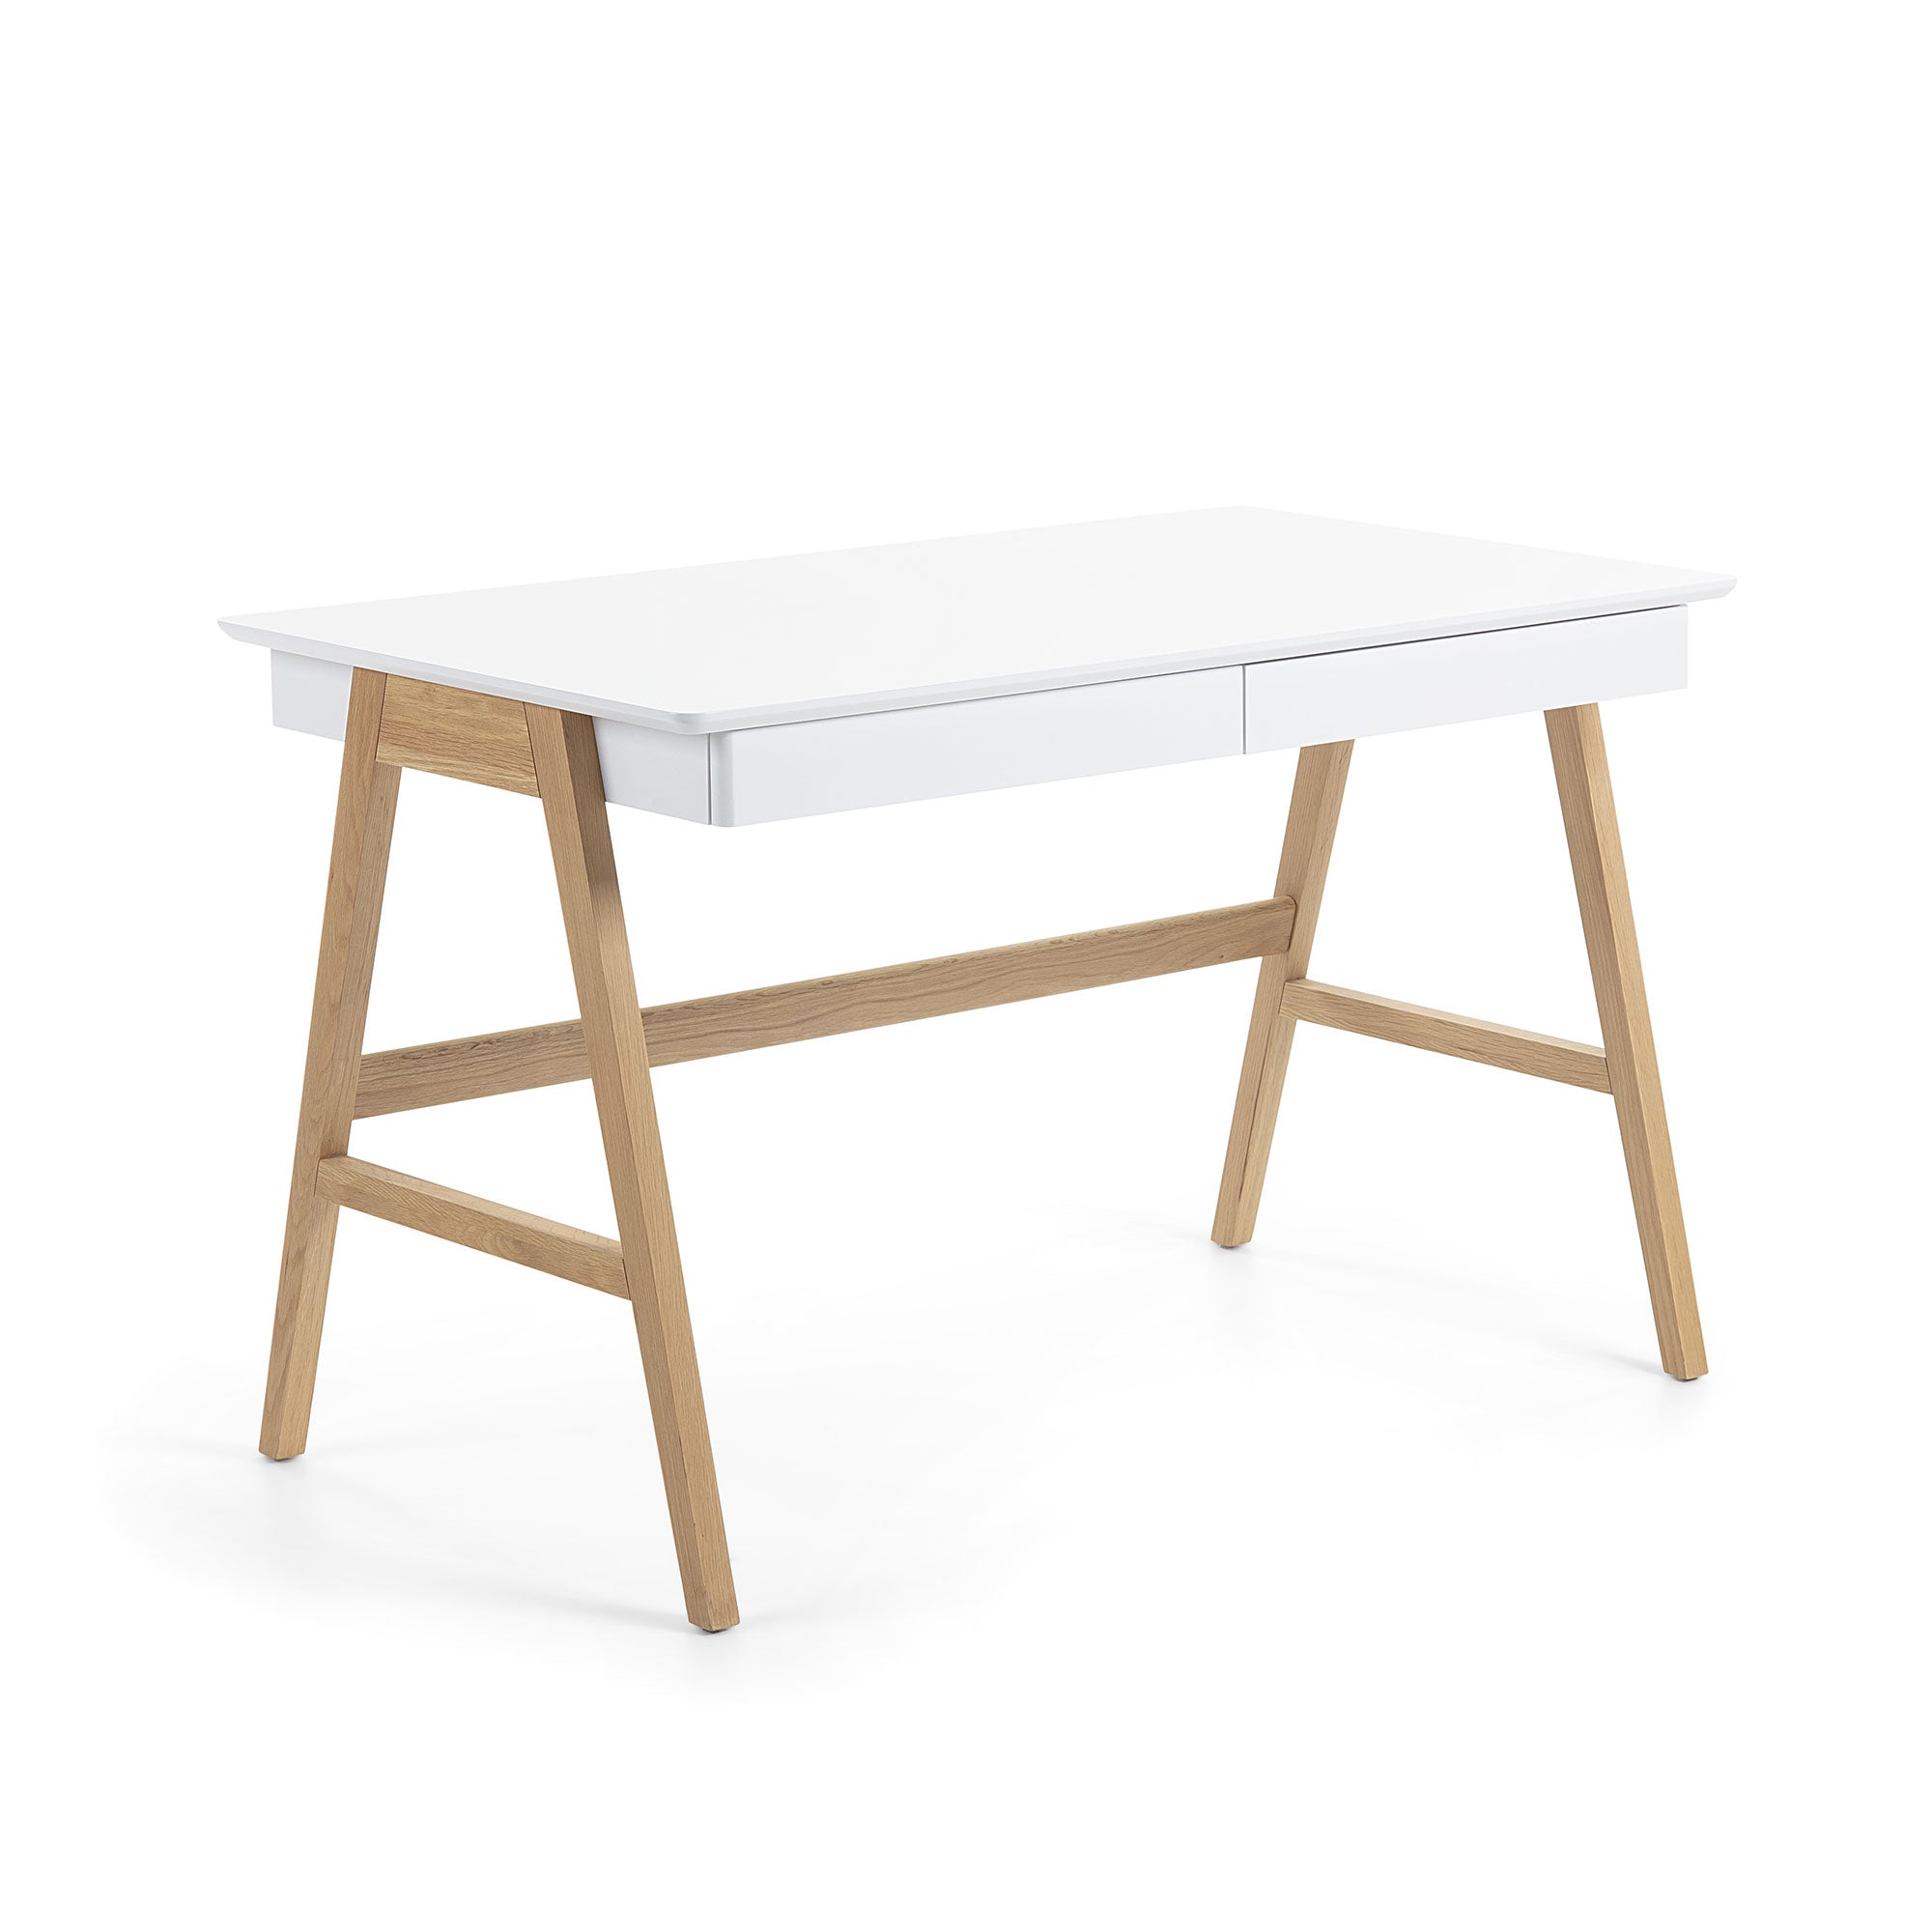 Dyana desk in MDF with white lacquer and solid ash wood legs, 120 x 60 cm